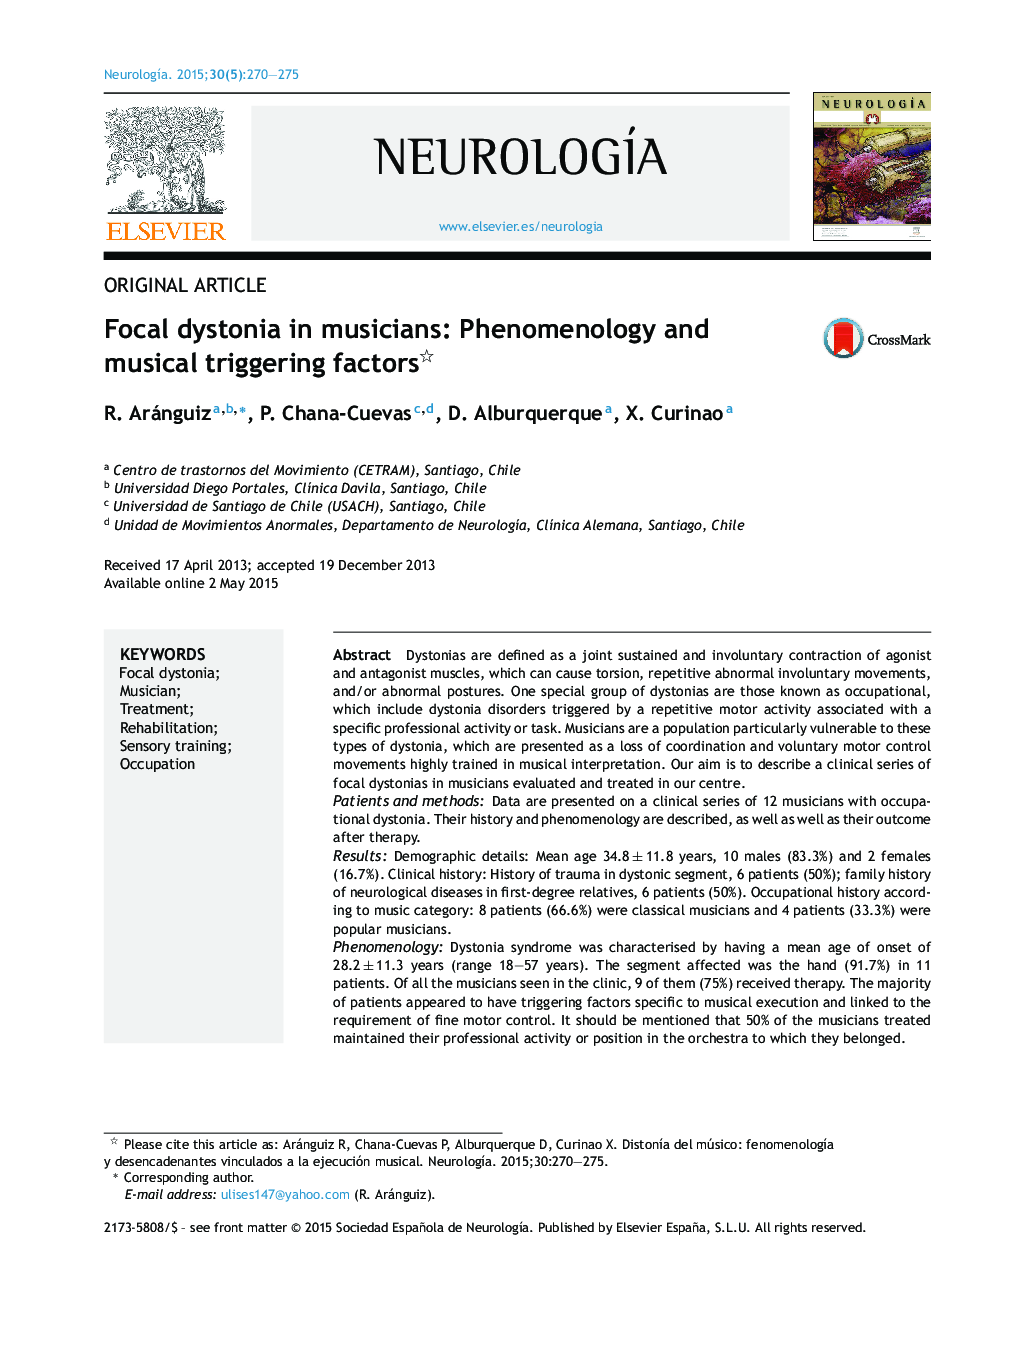 Focal dystonia in musicians: Phenomenology and musical triggering factors